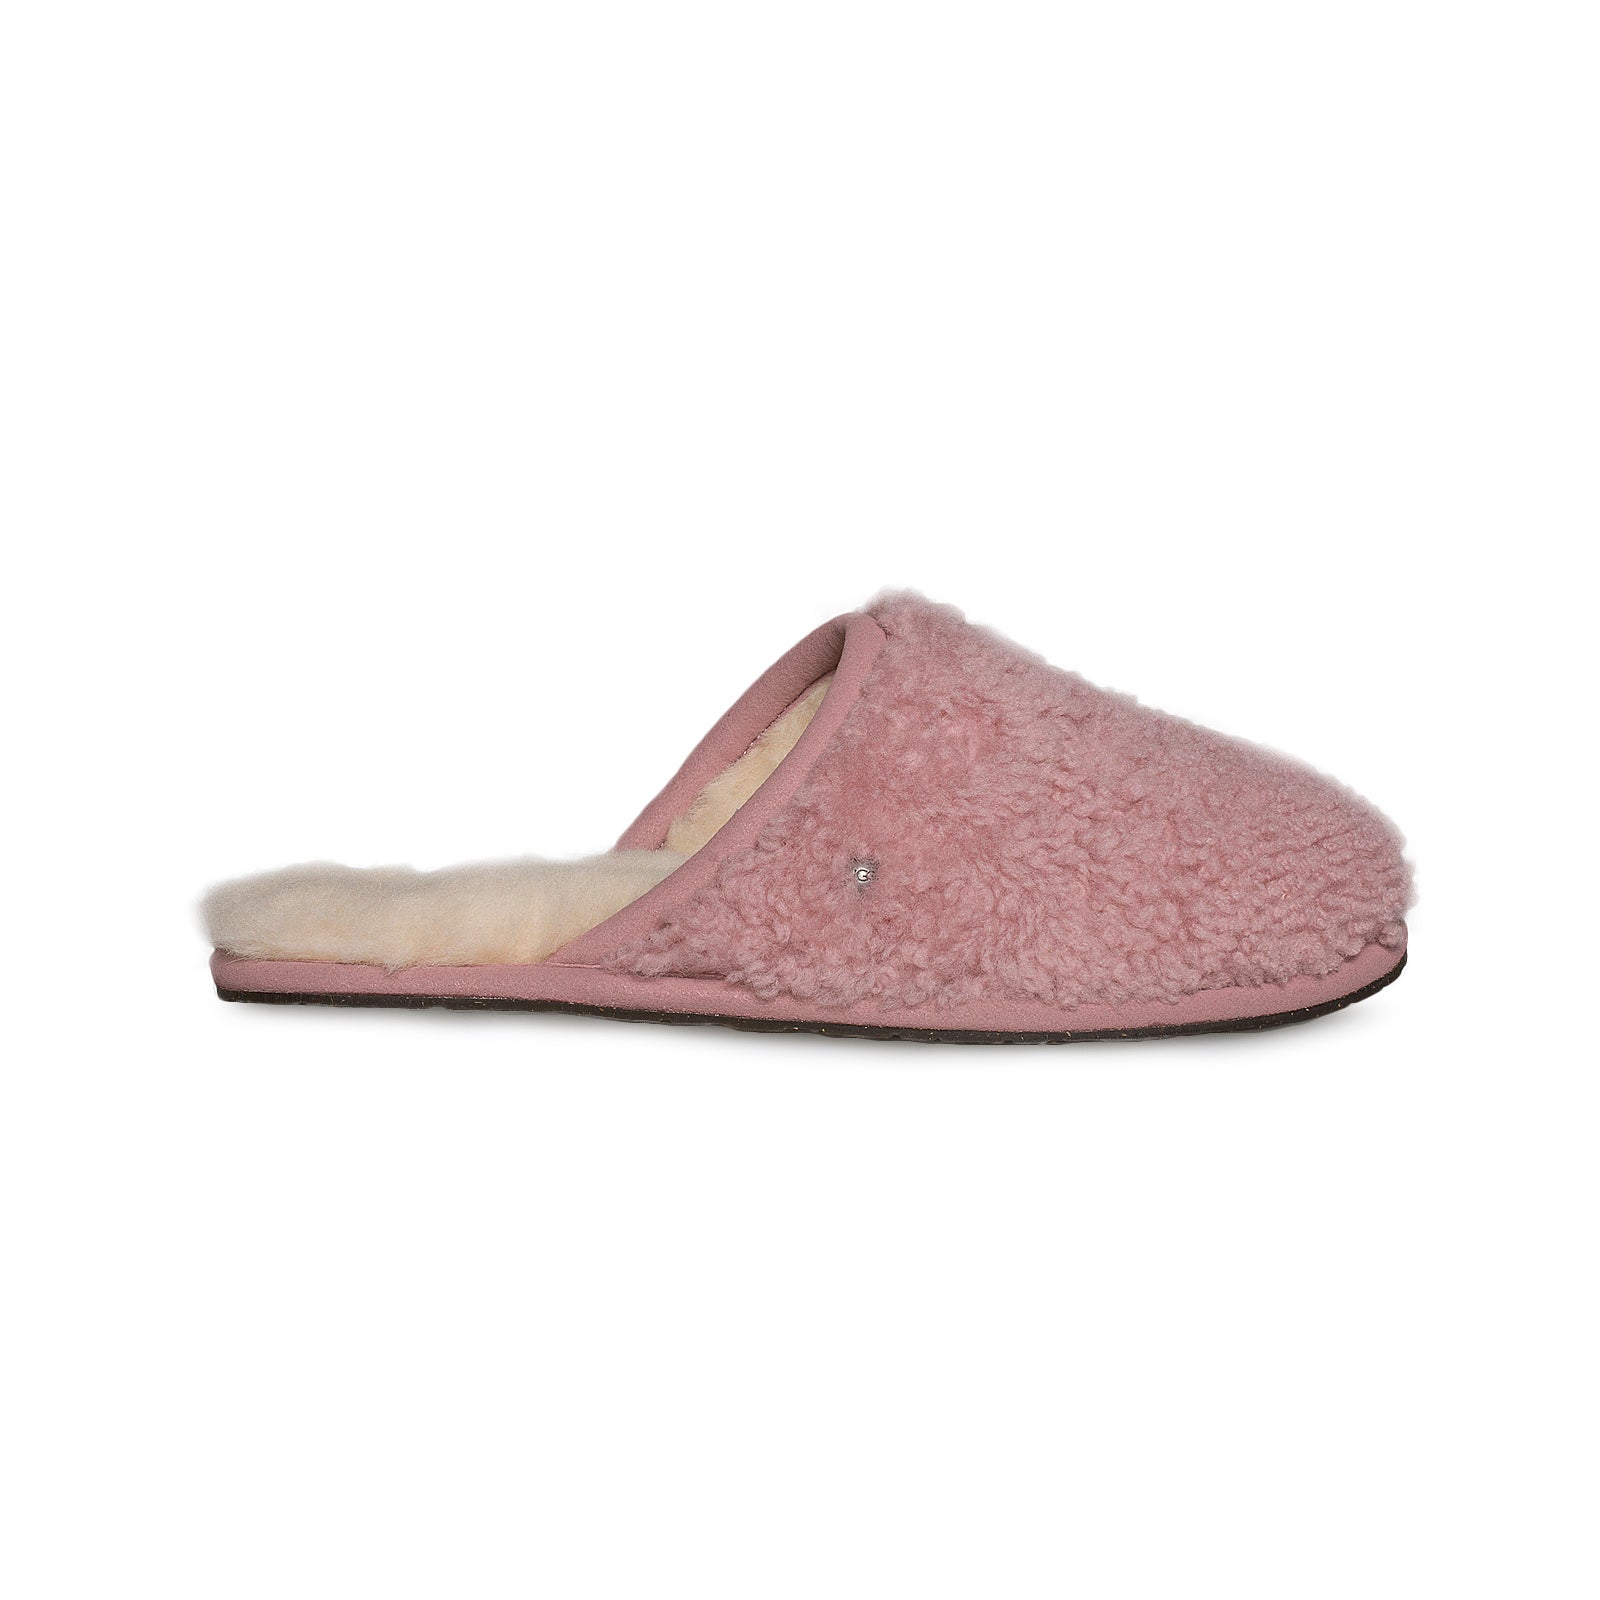 ugg pearle slippers pink